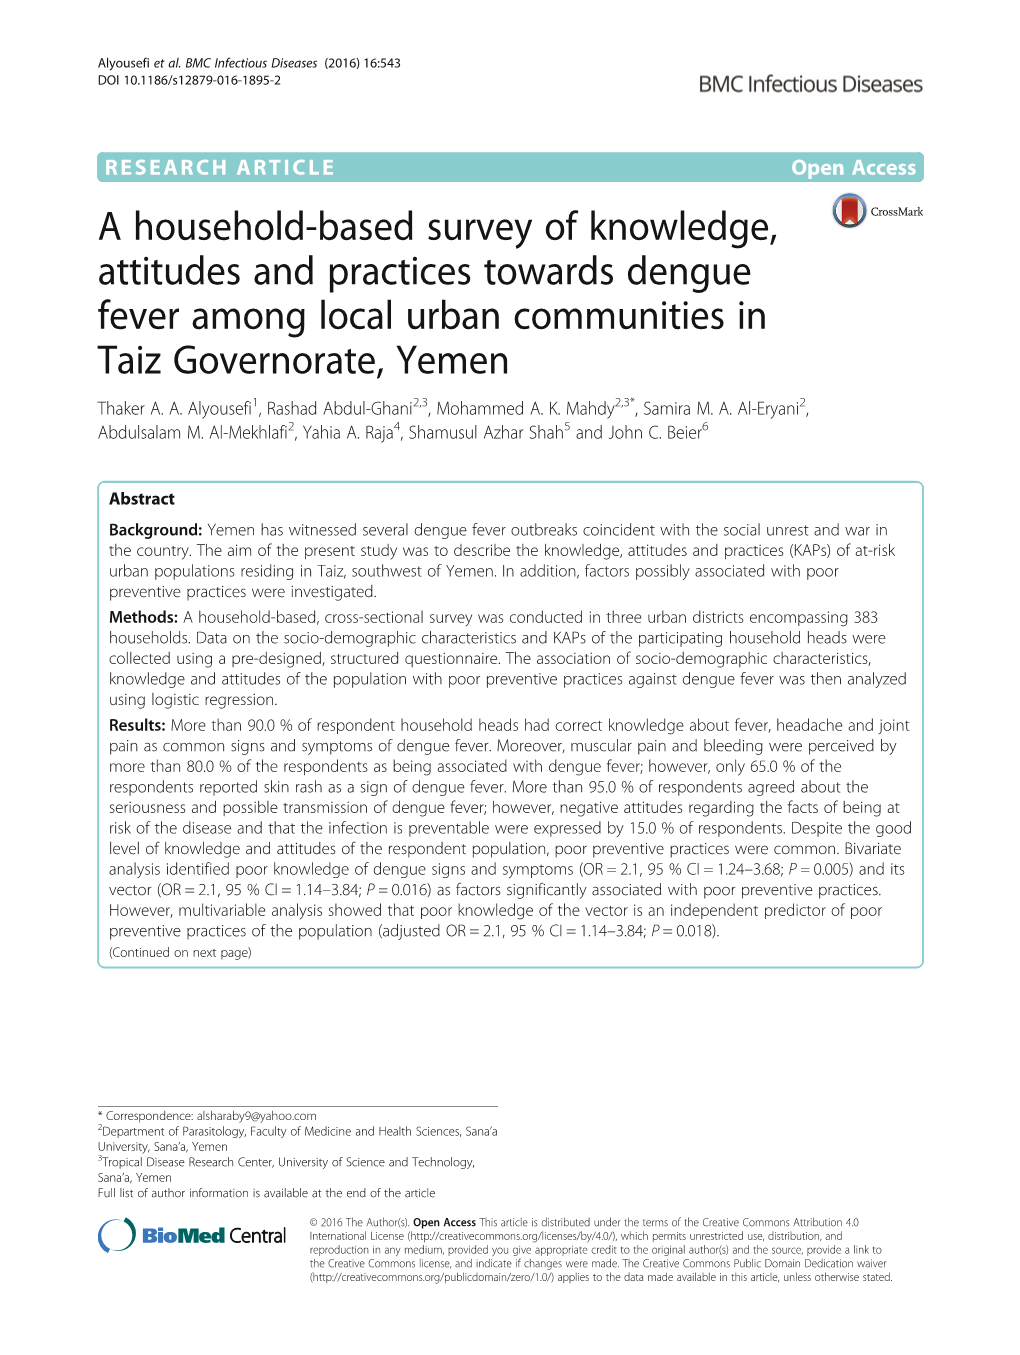 A Household-Based Survey of Knowledge, Attitudes and Practices Towards Dengue Fever Among Local Urban Communities in Taiz Governorate, Yemen Thaker A